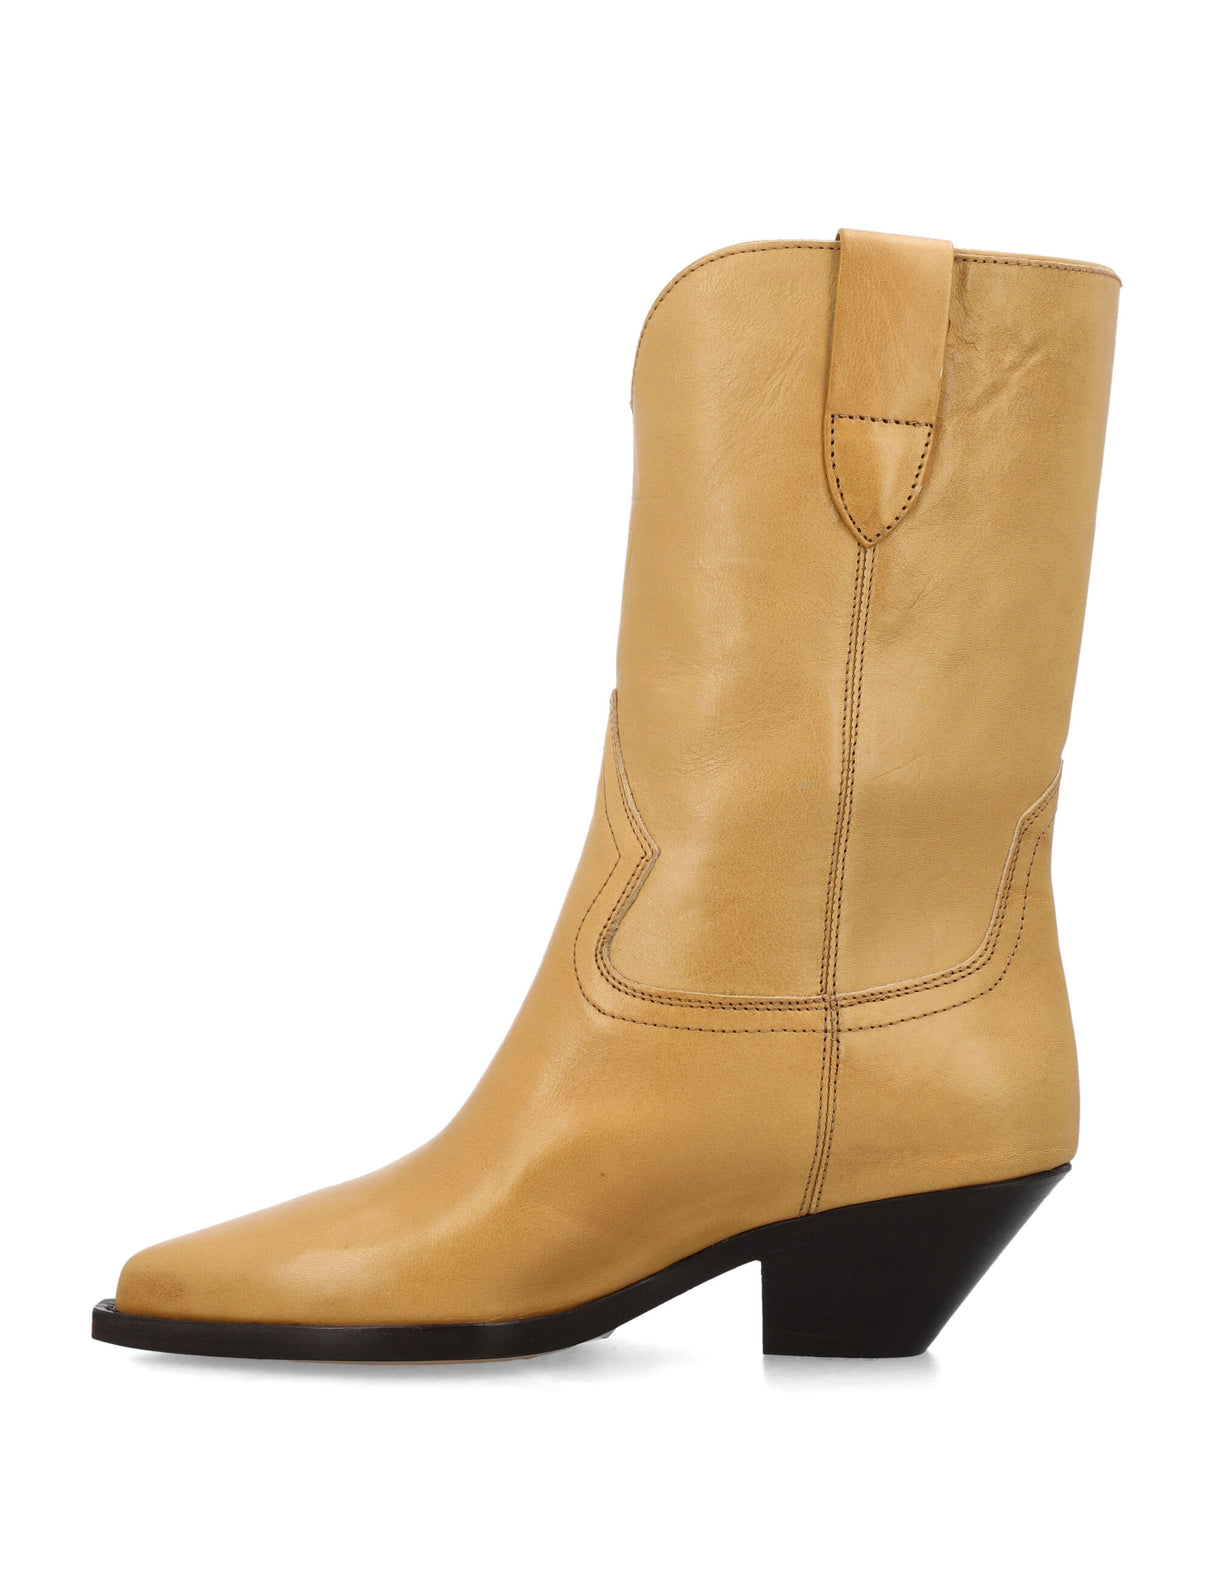 Pointed Toe Cowboy Boots with Natural Leather for Women